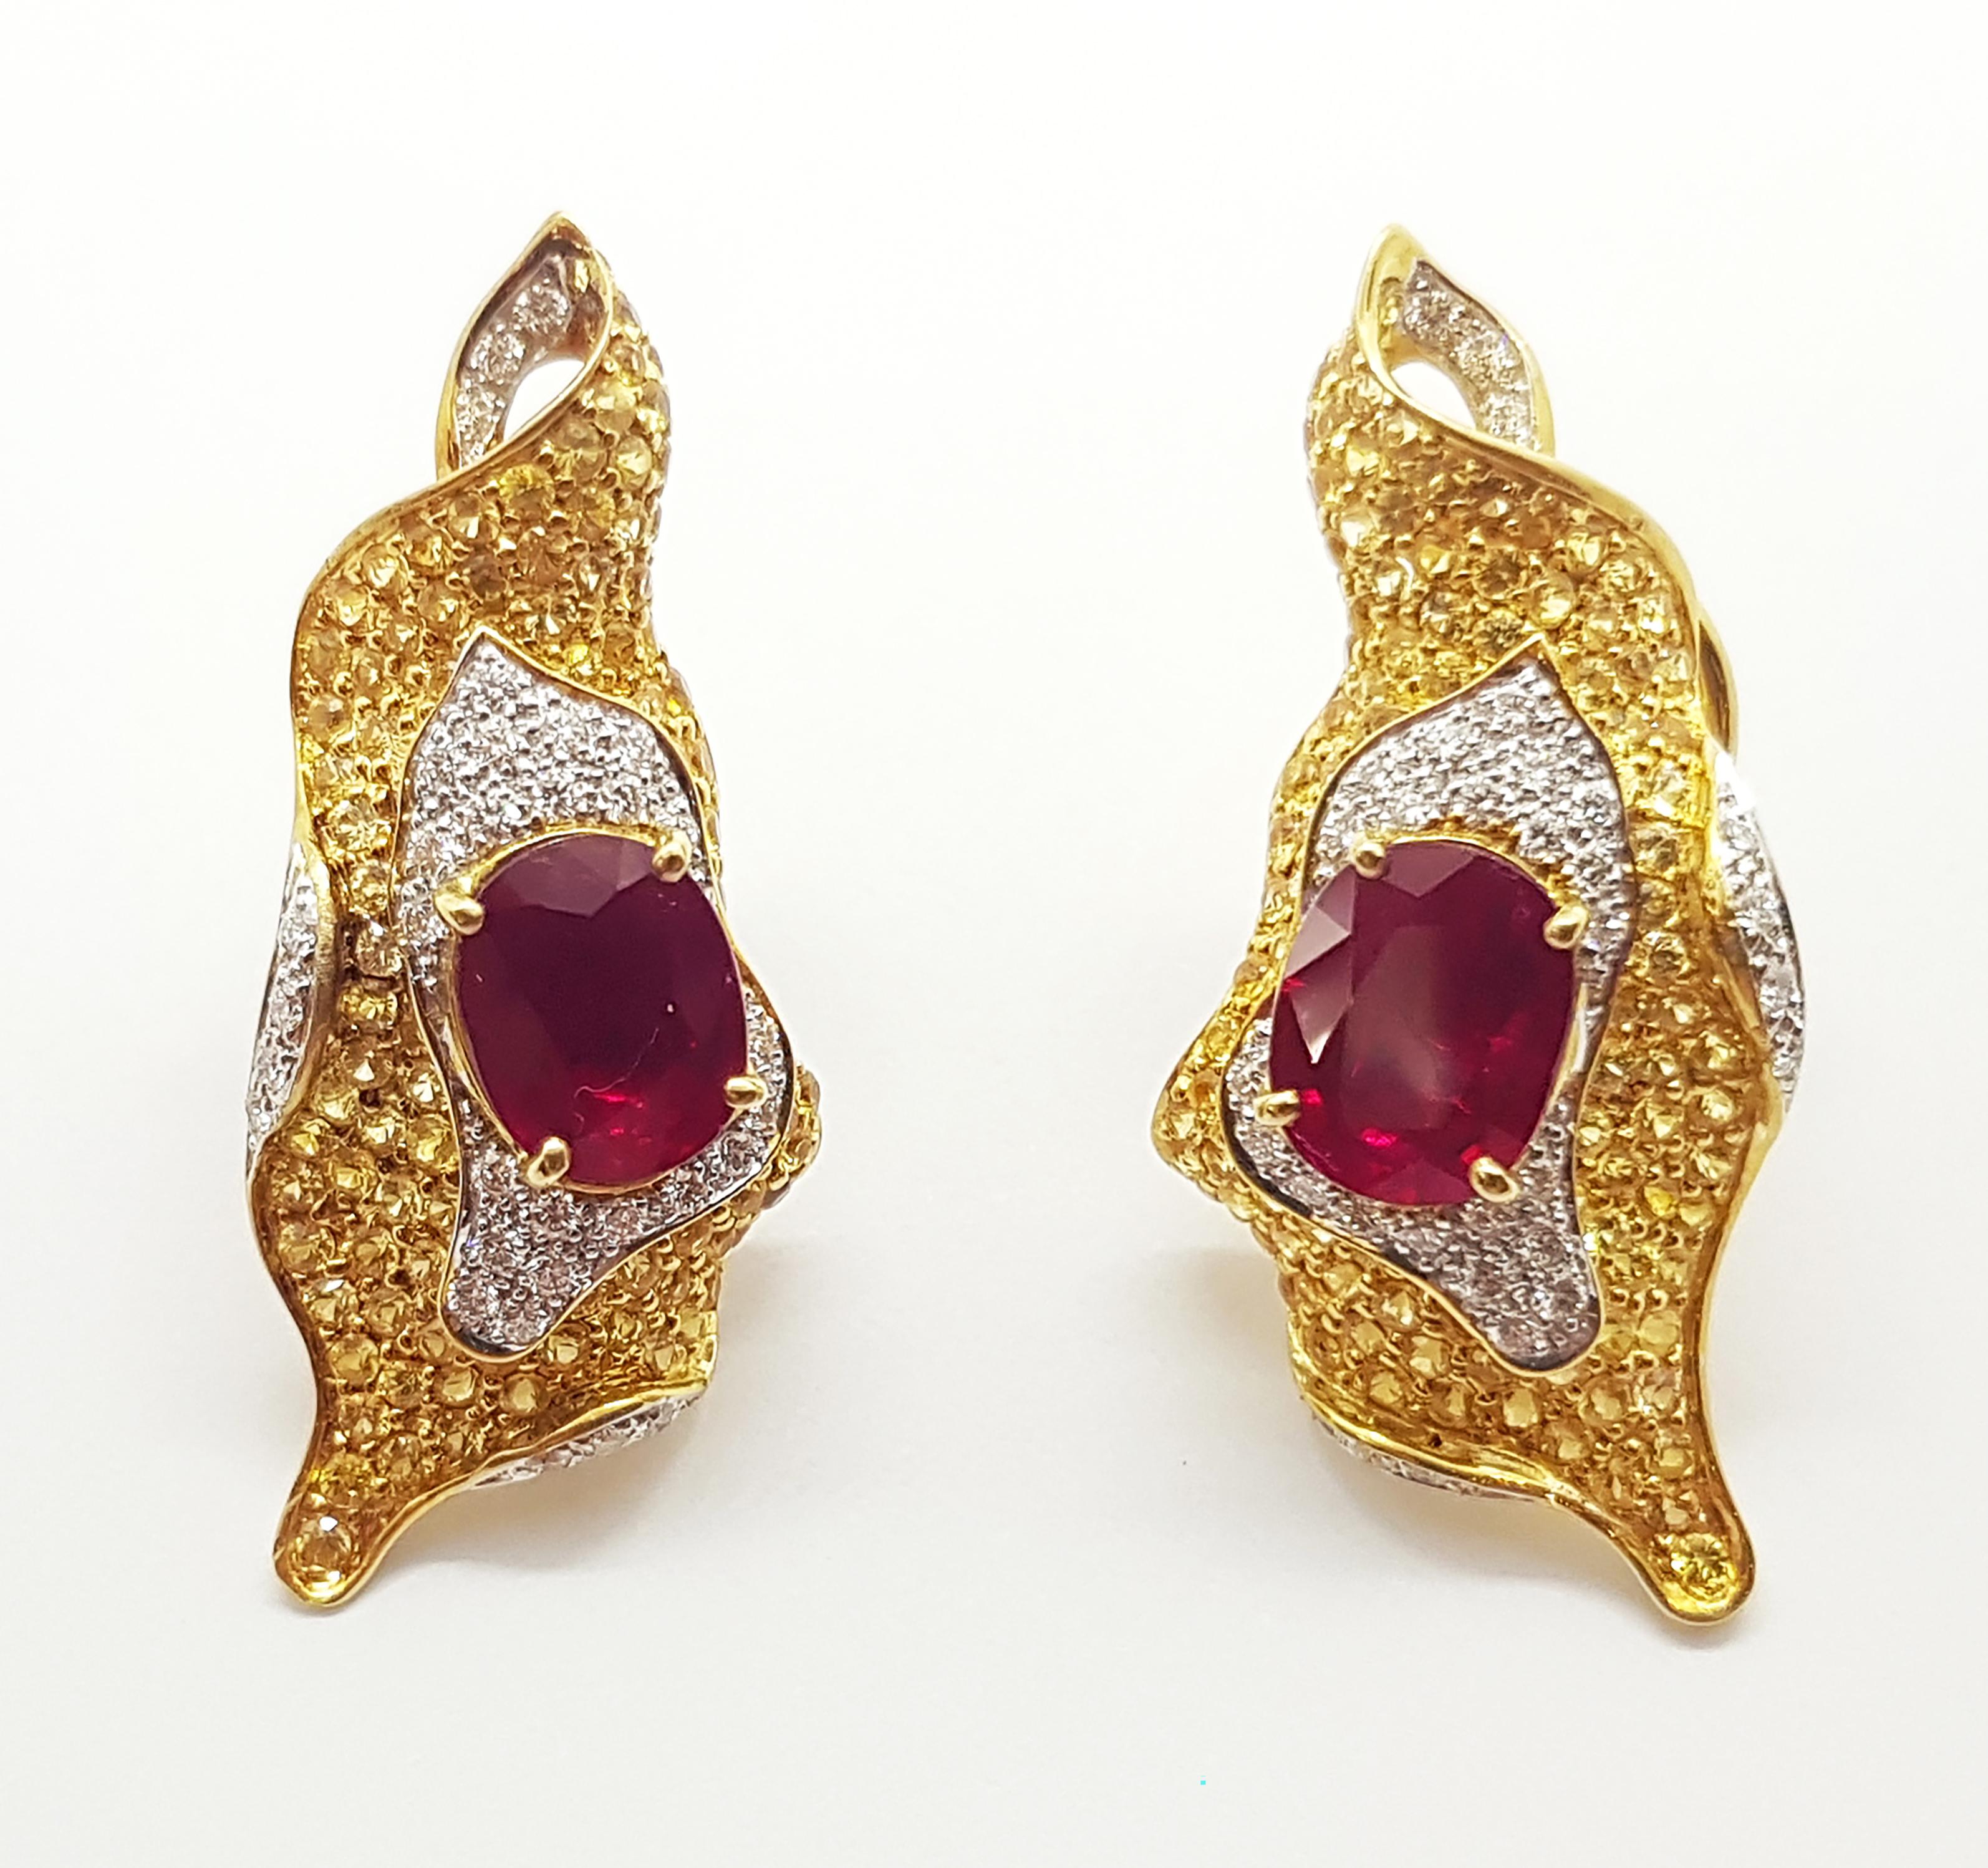 Ruby 3.88 carats with Yellow Sapphire 3.09 carats and Diamond 0.58 carat Earrings set in 18 Karat Gold Settings

Width:  1.5 cm 
Length:  3.8 cm
Total Weight: 13.95 grams

FOUNDED BY AWARD-WINNING COUPLE, NUTTAPON (KENNY) & SHAR-LINN, KAVANT &